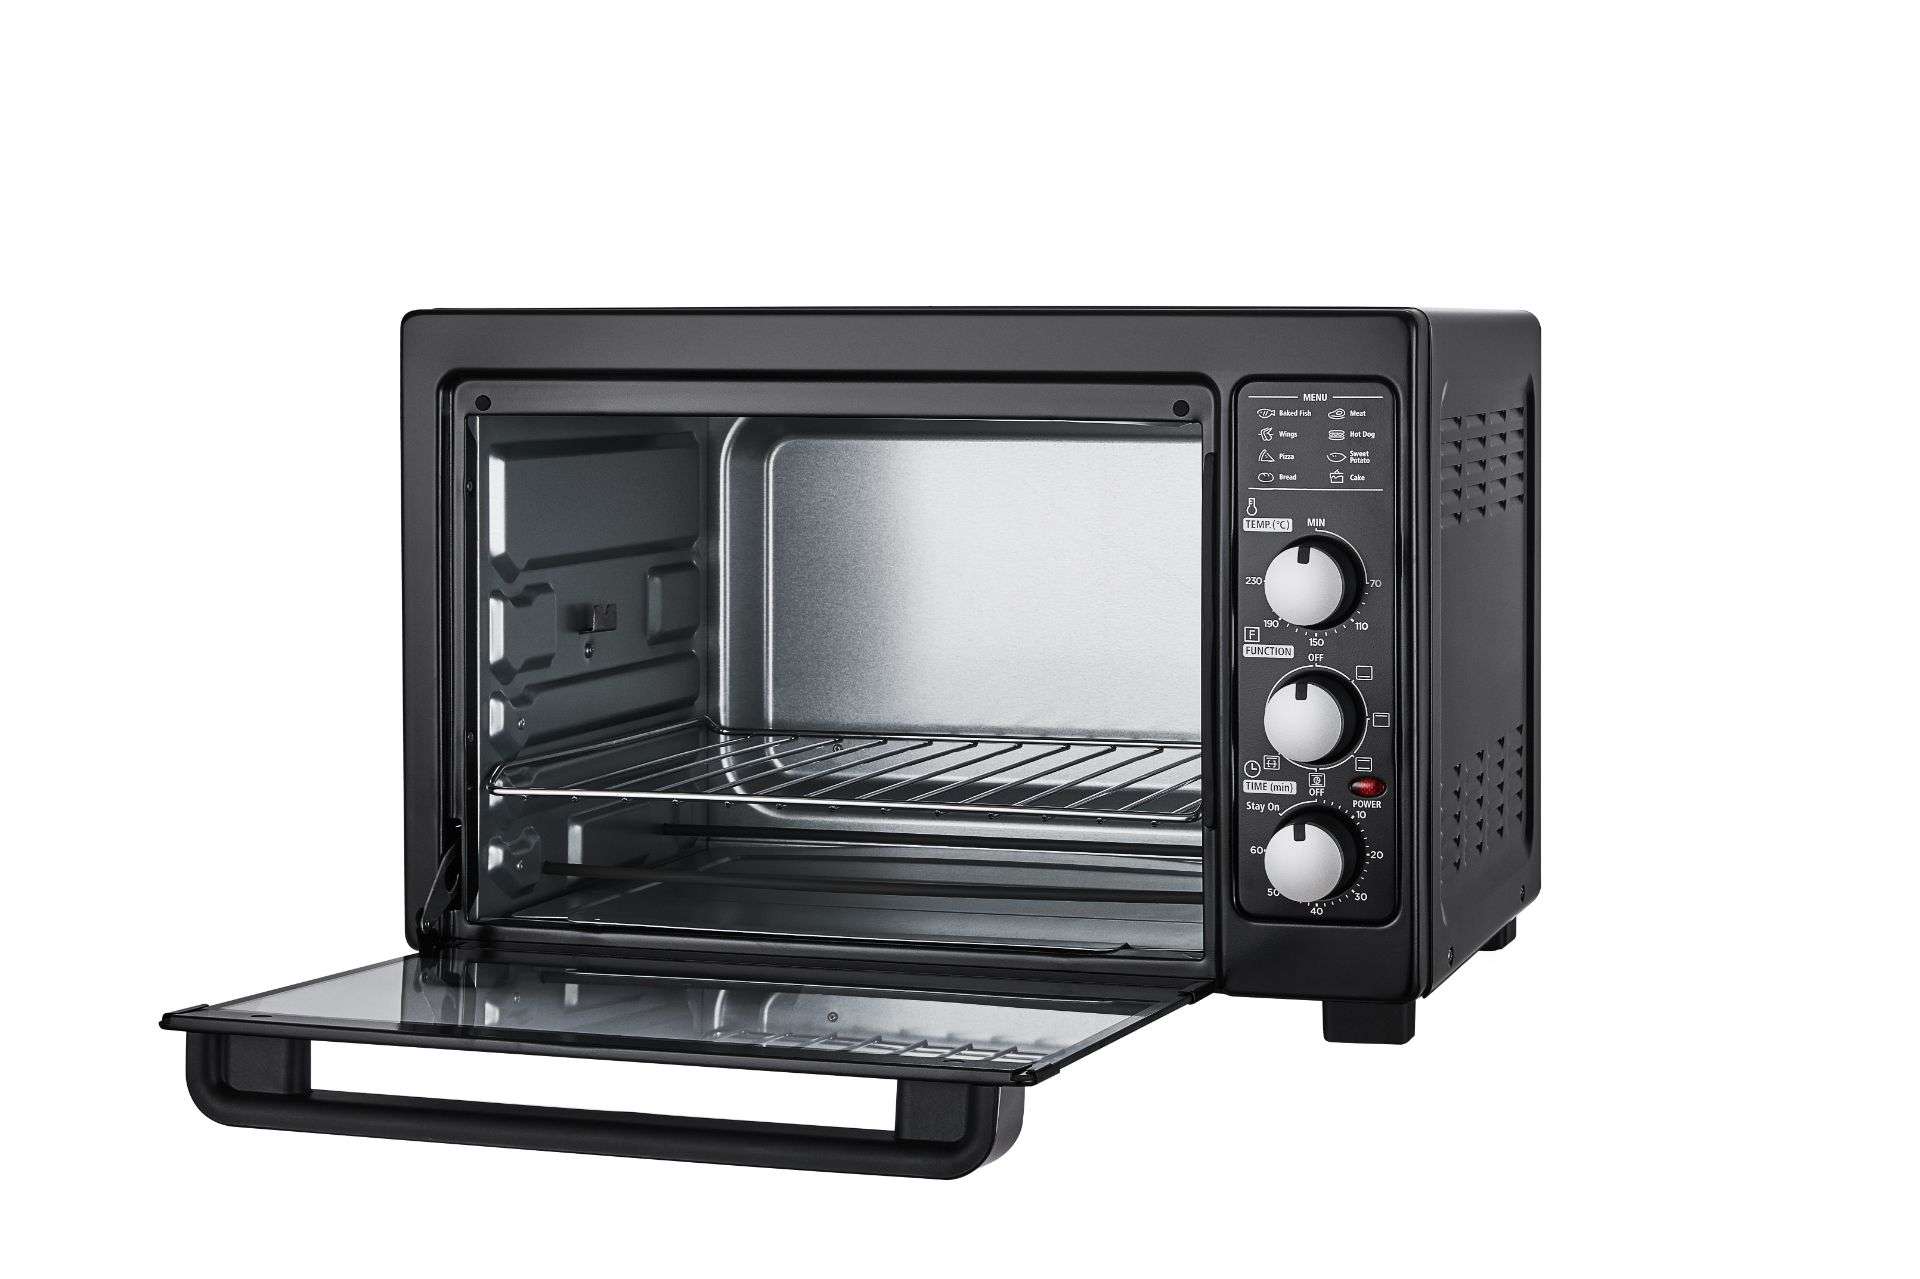 Buy Ovens, Toasters & Grillers Online at Best Prices in India